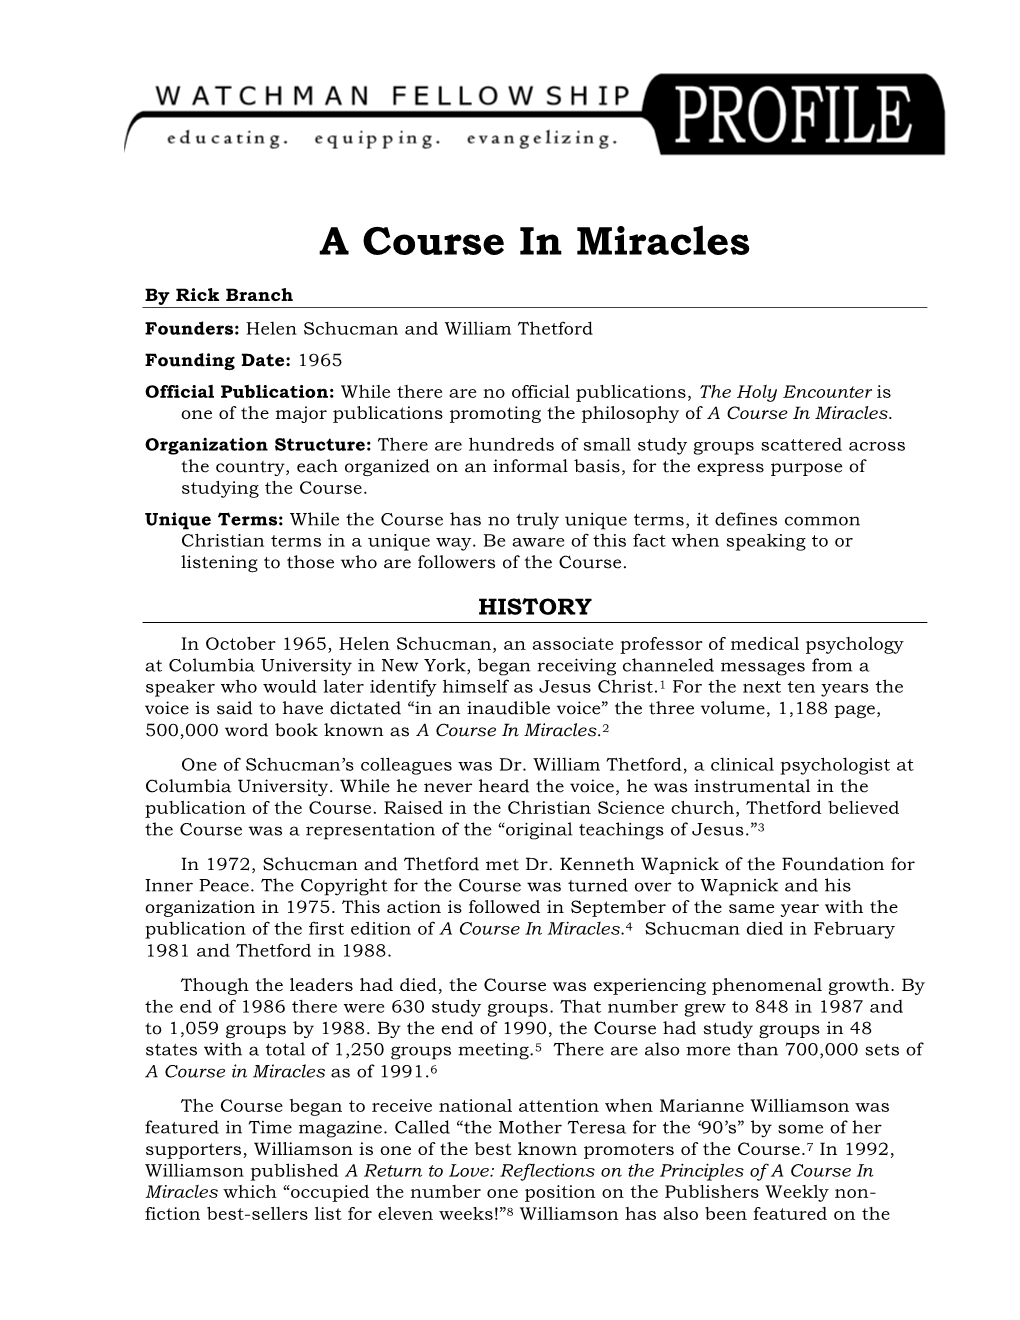 A Course in Miracles Profile